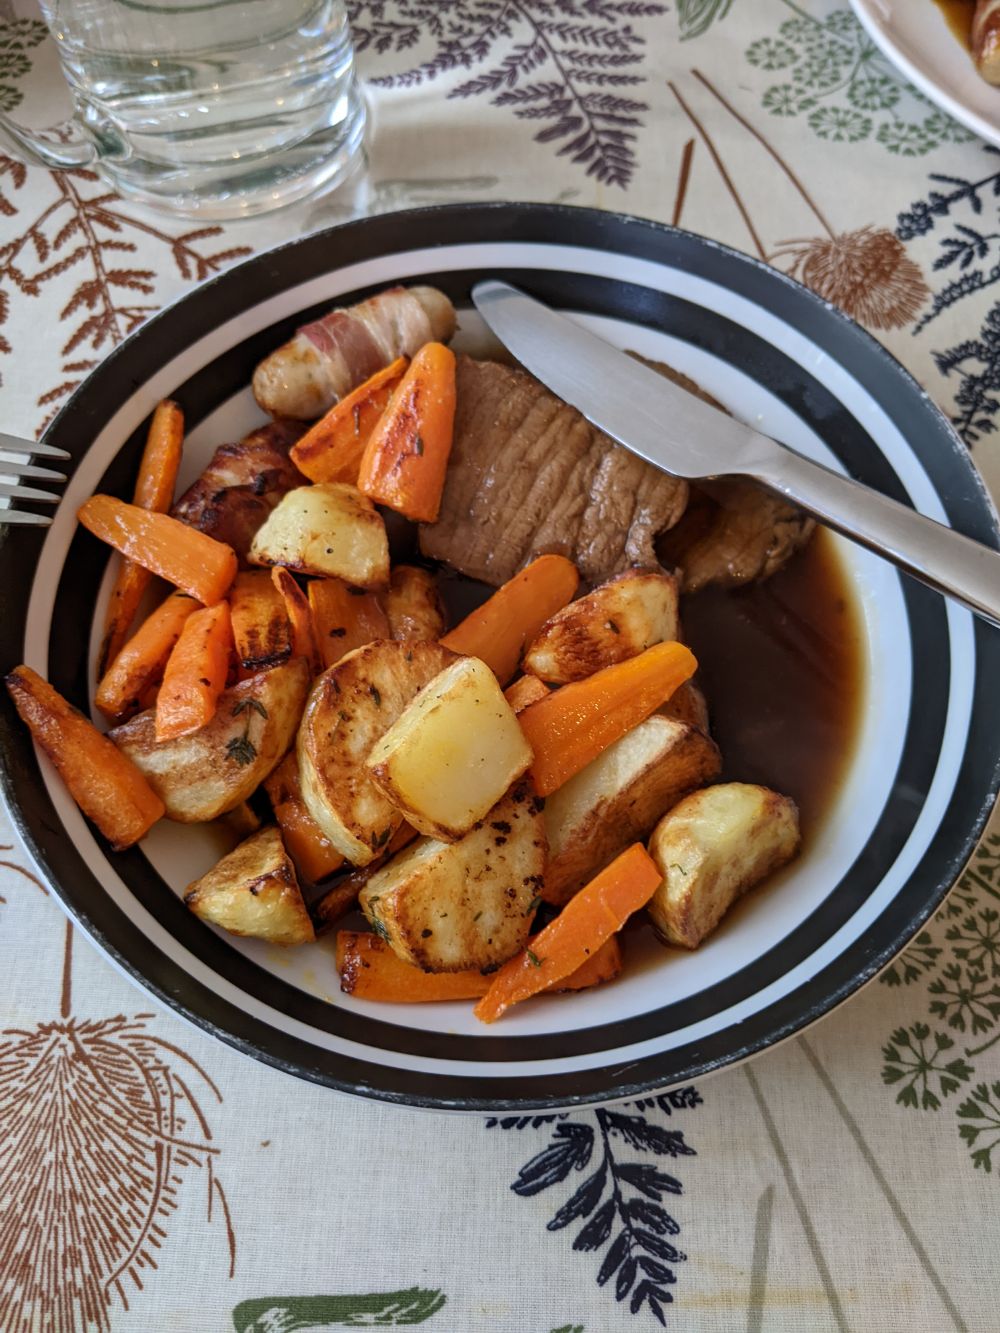 A dish filled with a roast beef dinner - air fryer cooked carrots, roast potatoes and roast beef, with pigs in blankets and gravy